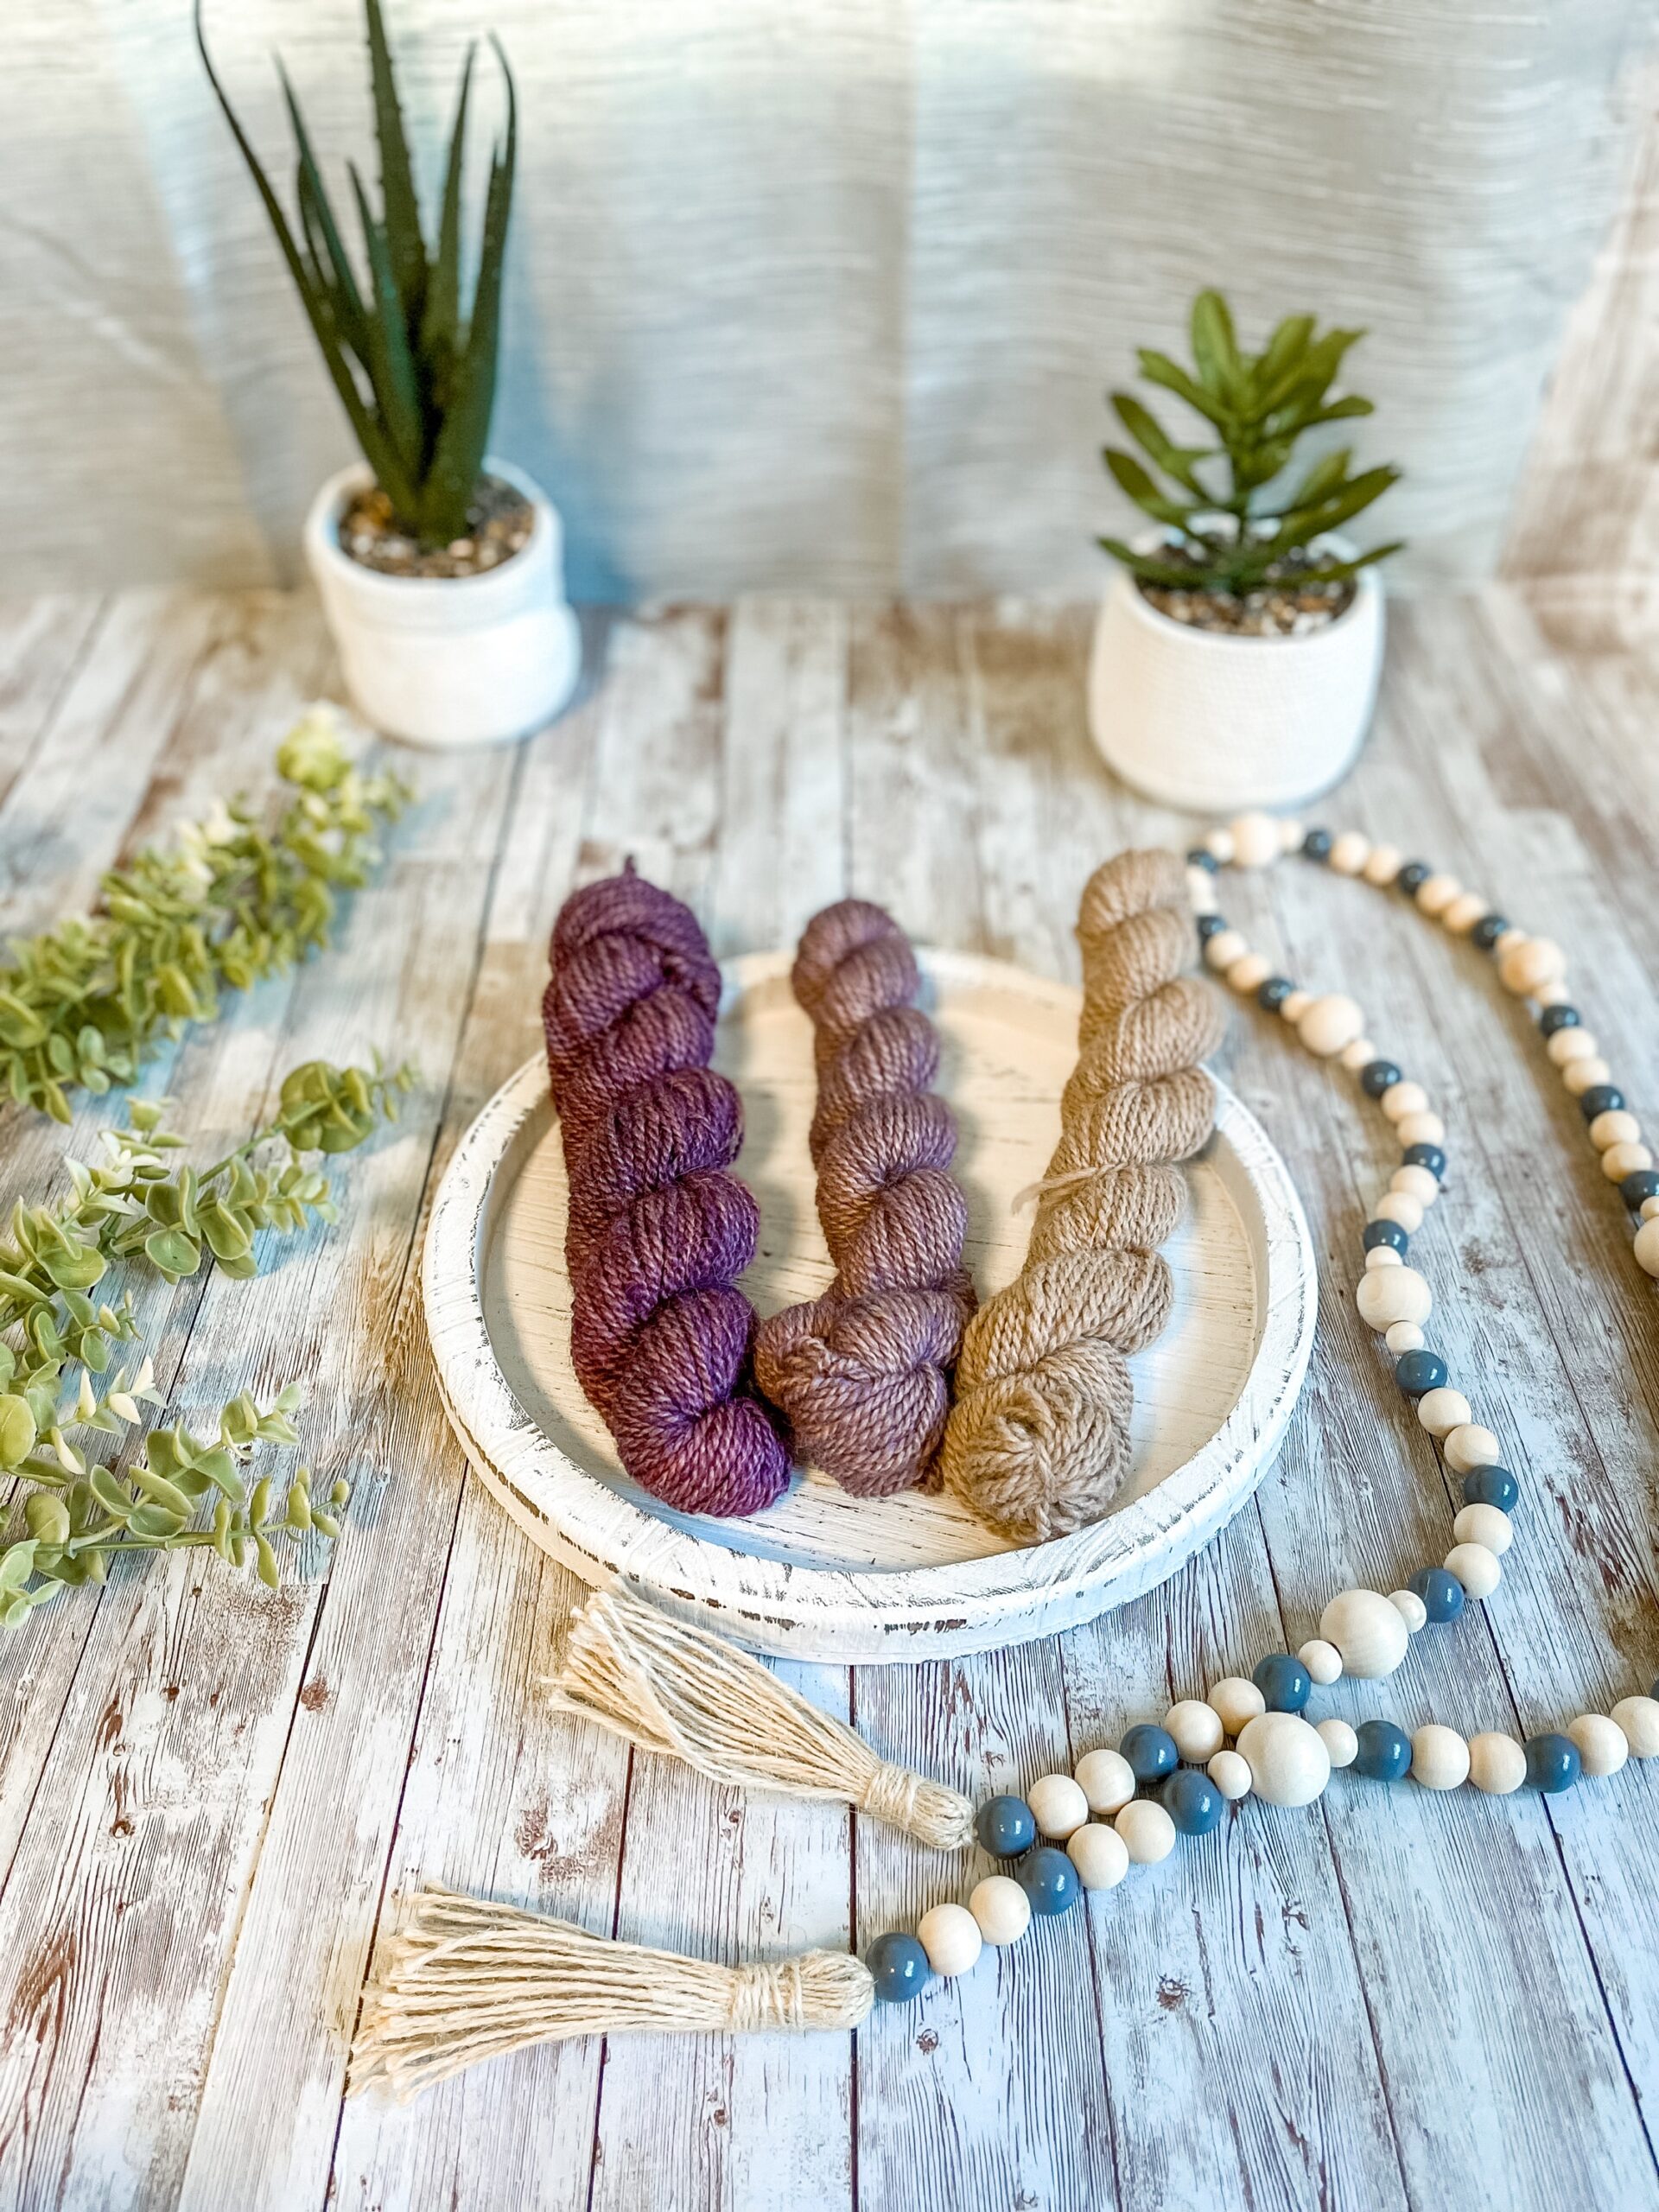 A set of 3 mini skeins in a purple fade from dark purple to natural fawn,rests on a white wood trivet. They are surrounded by beads to the right, greenery to the left and 2 succulent plants in the background.